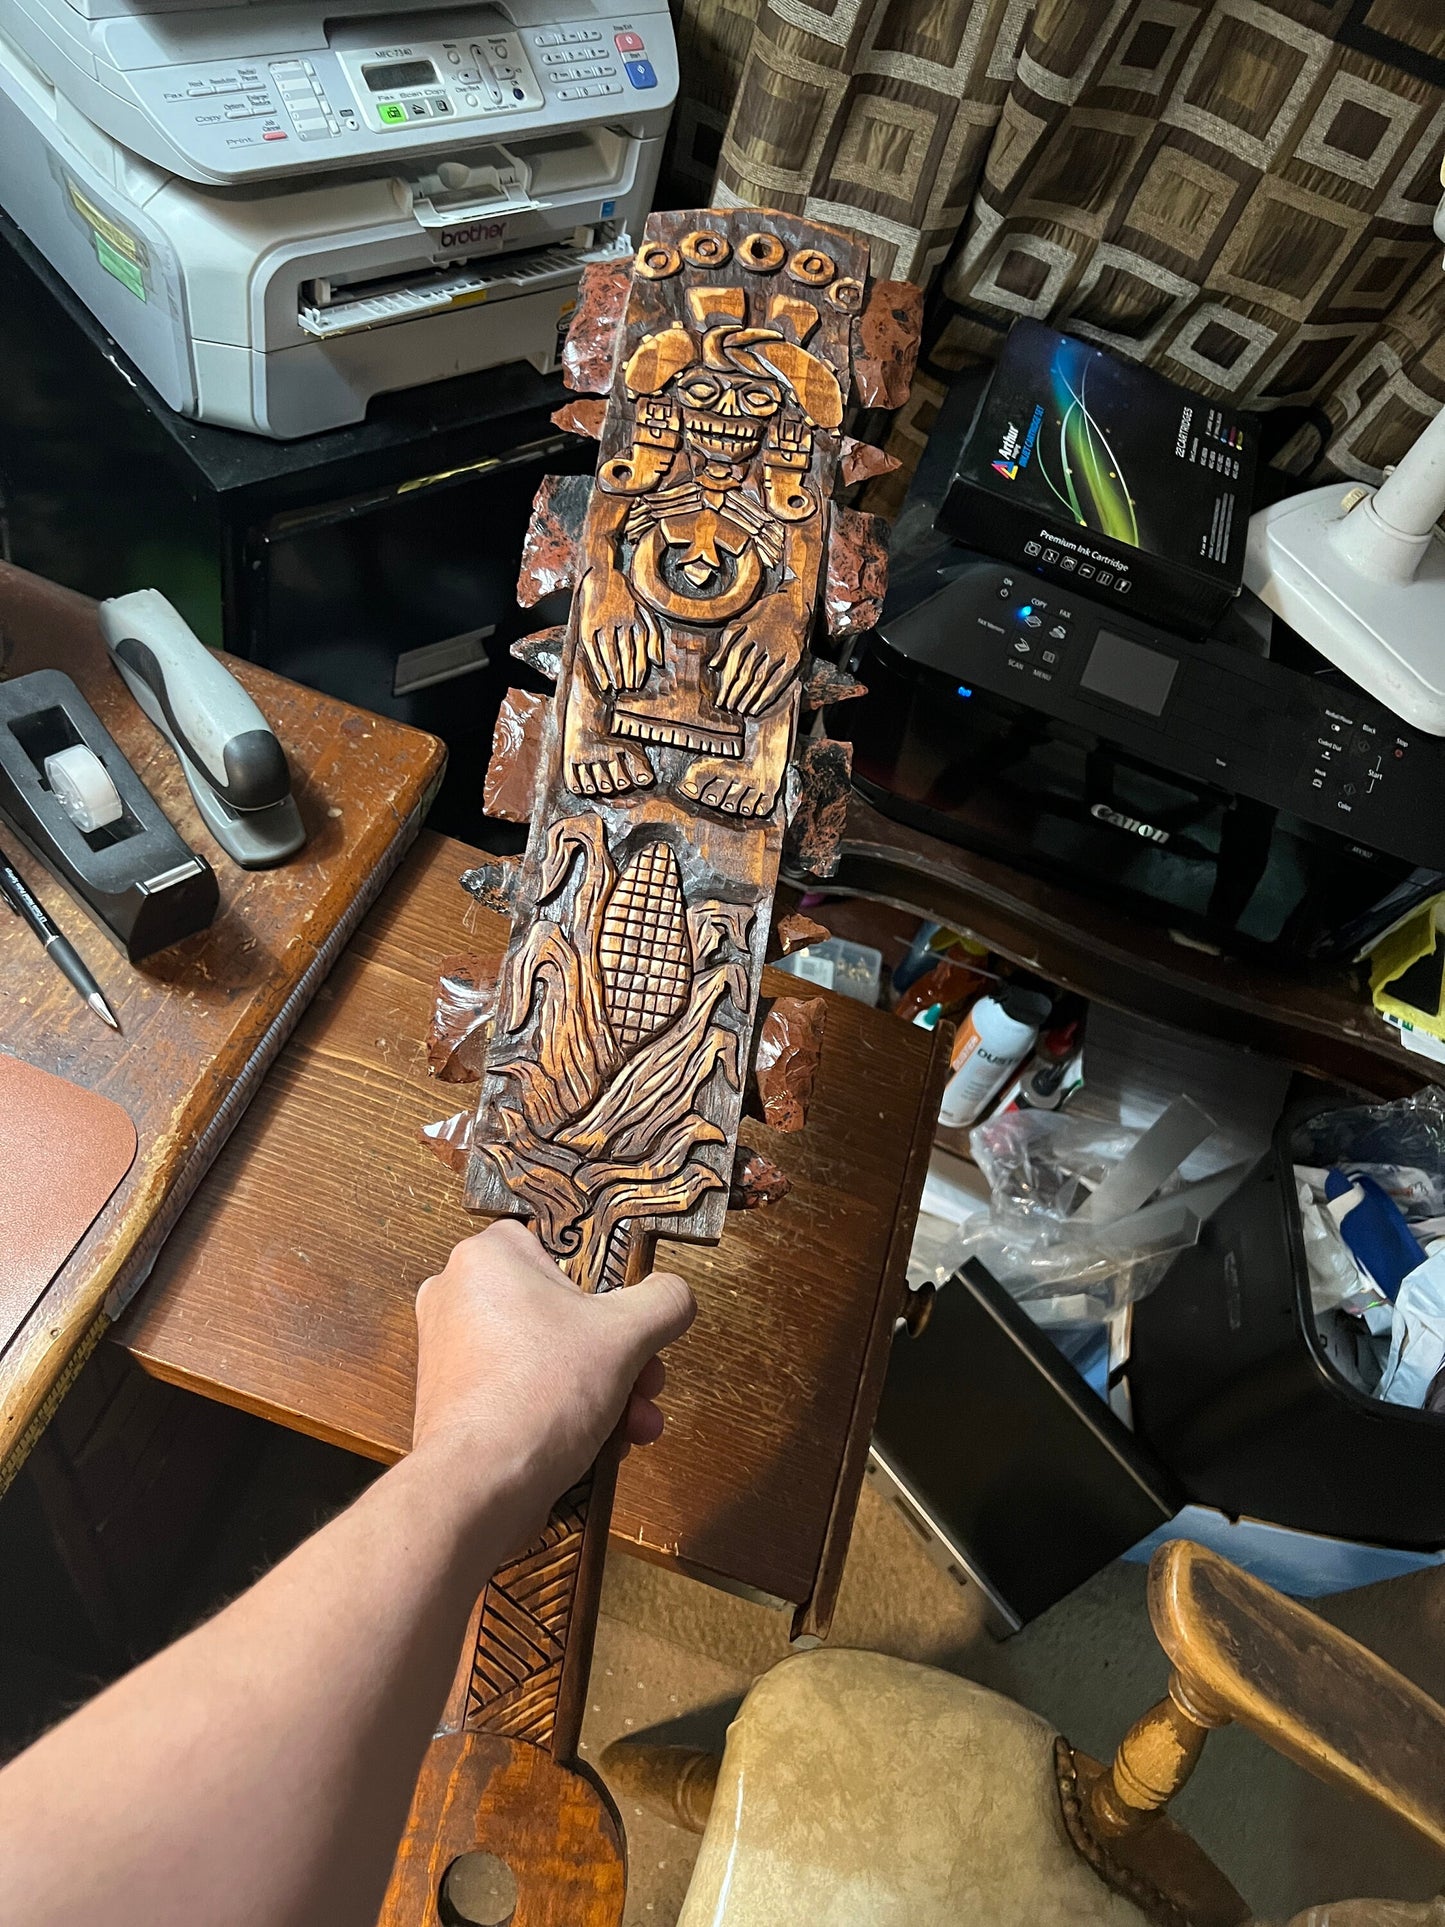 Aztec Macuahuitl, Mictecacihuatl, Lady of the Dead, Day of the Dead, Wood, Obsidian, Hand Carved, Wall Art, Replica Ancient Mexica